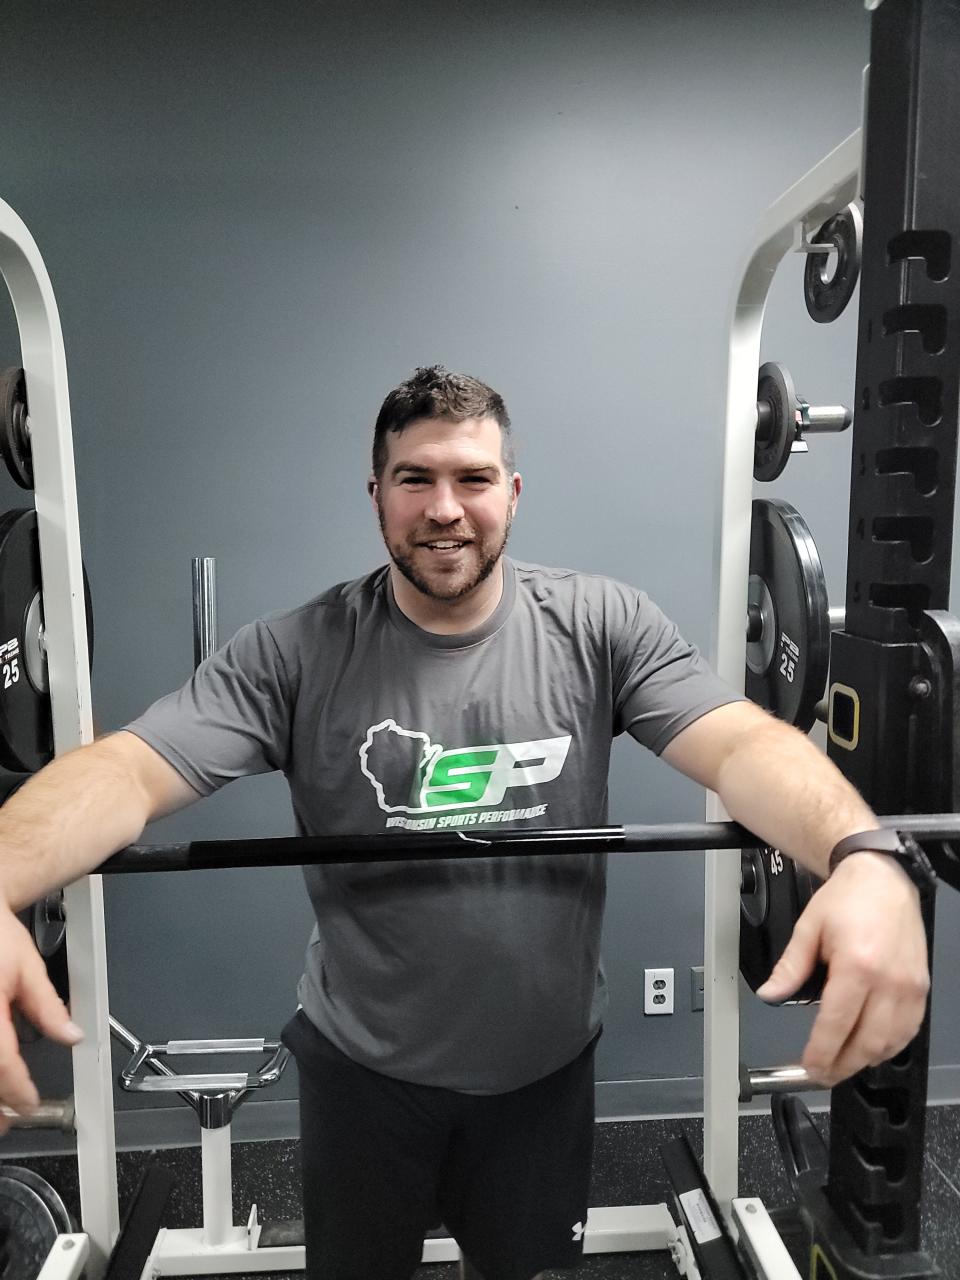 Stephen Linzmeier, a certified and experienced personal trainer, opened Wisconsin Sports Performance, a training facility for athletes and adult fitness.